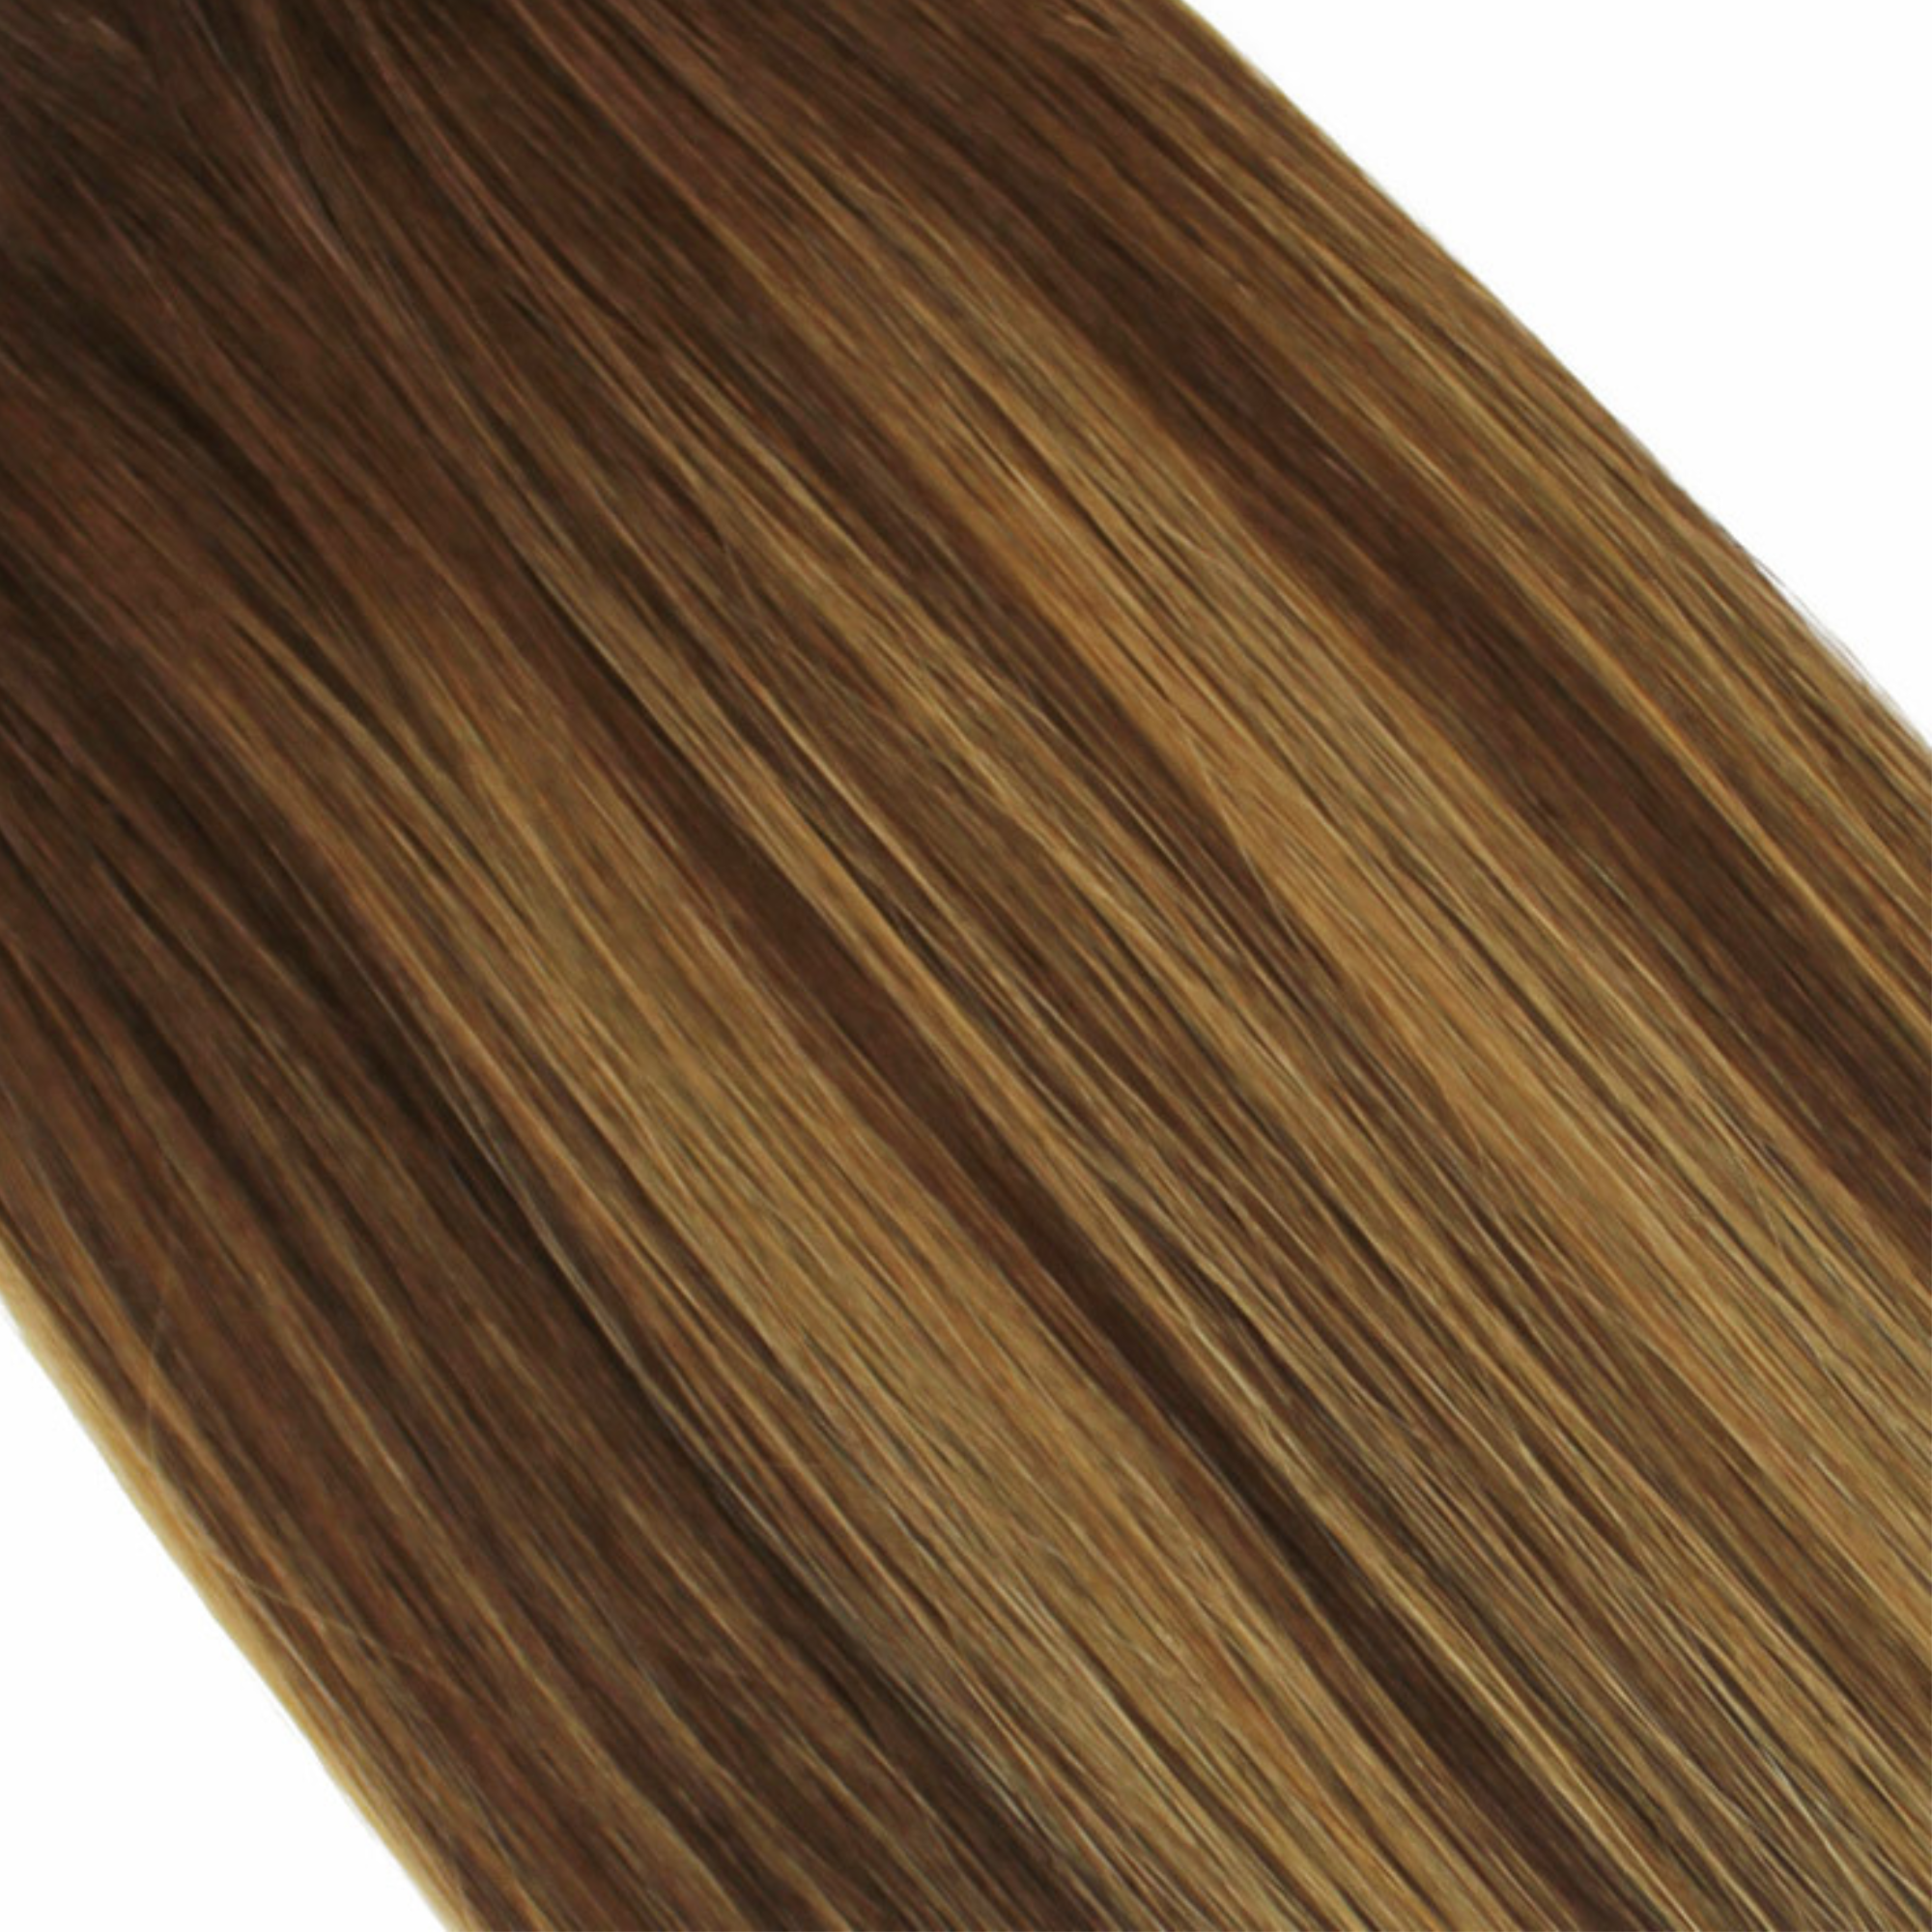 "hair rehab london 18" tape hair extensions shade swatch titled rooted bronze"